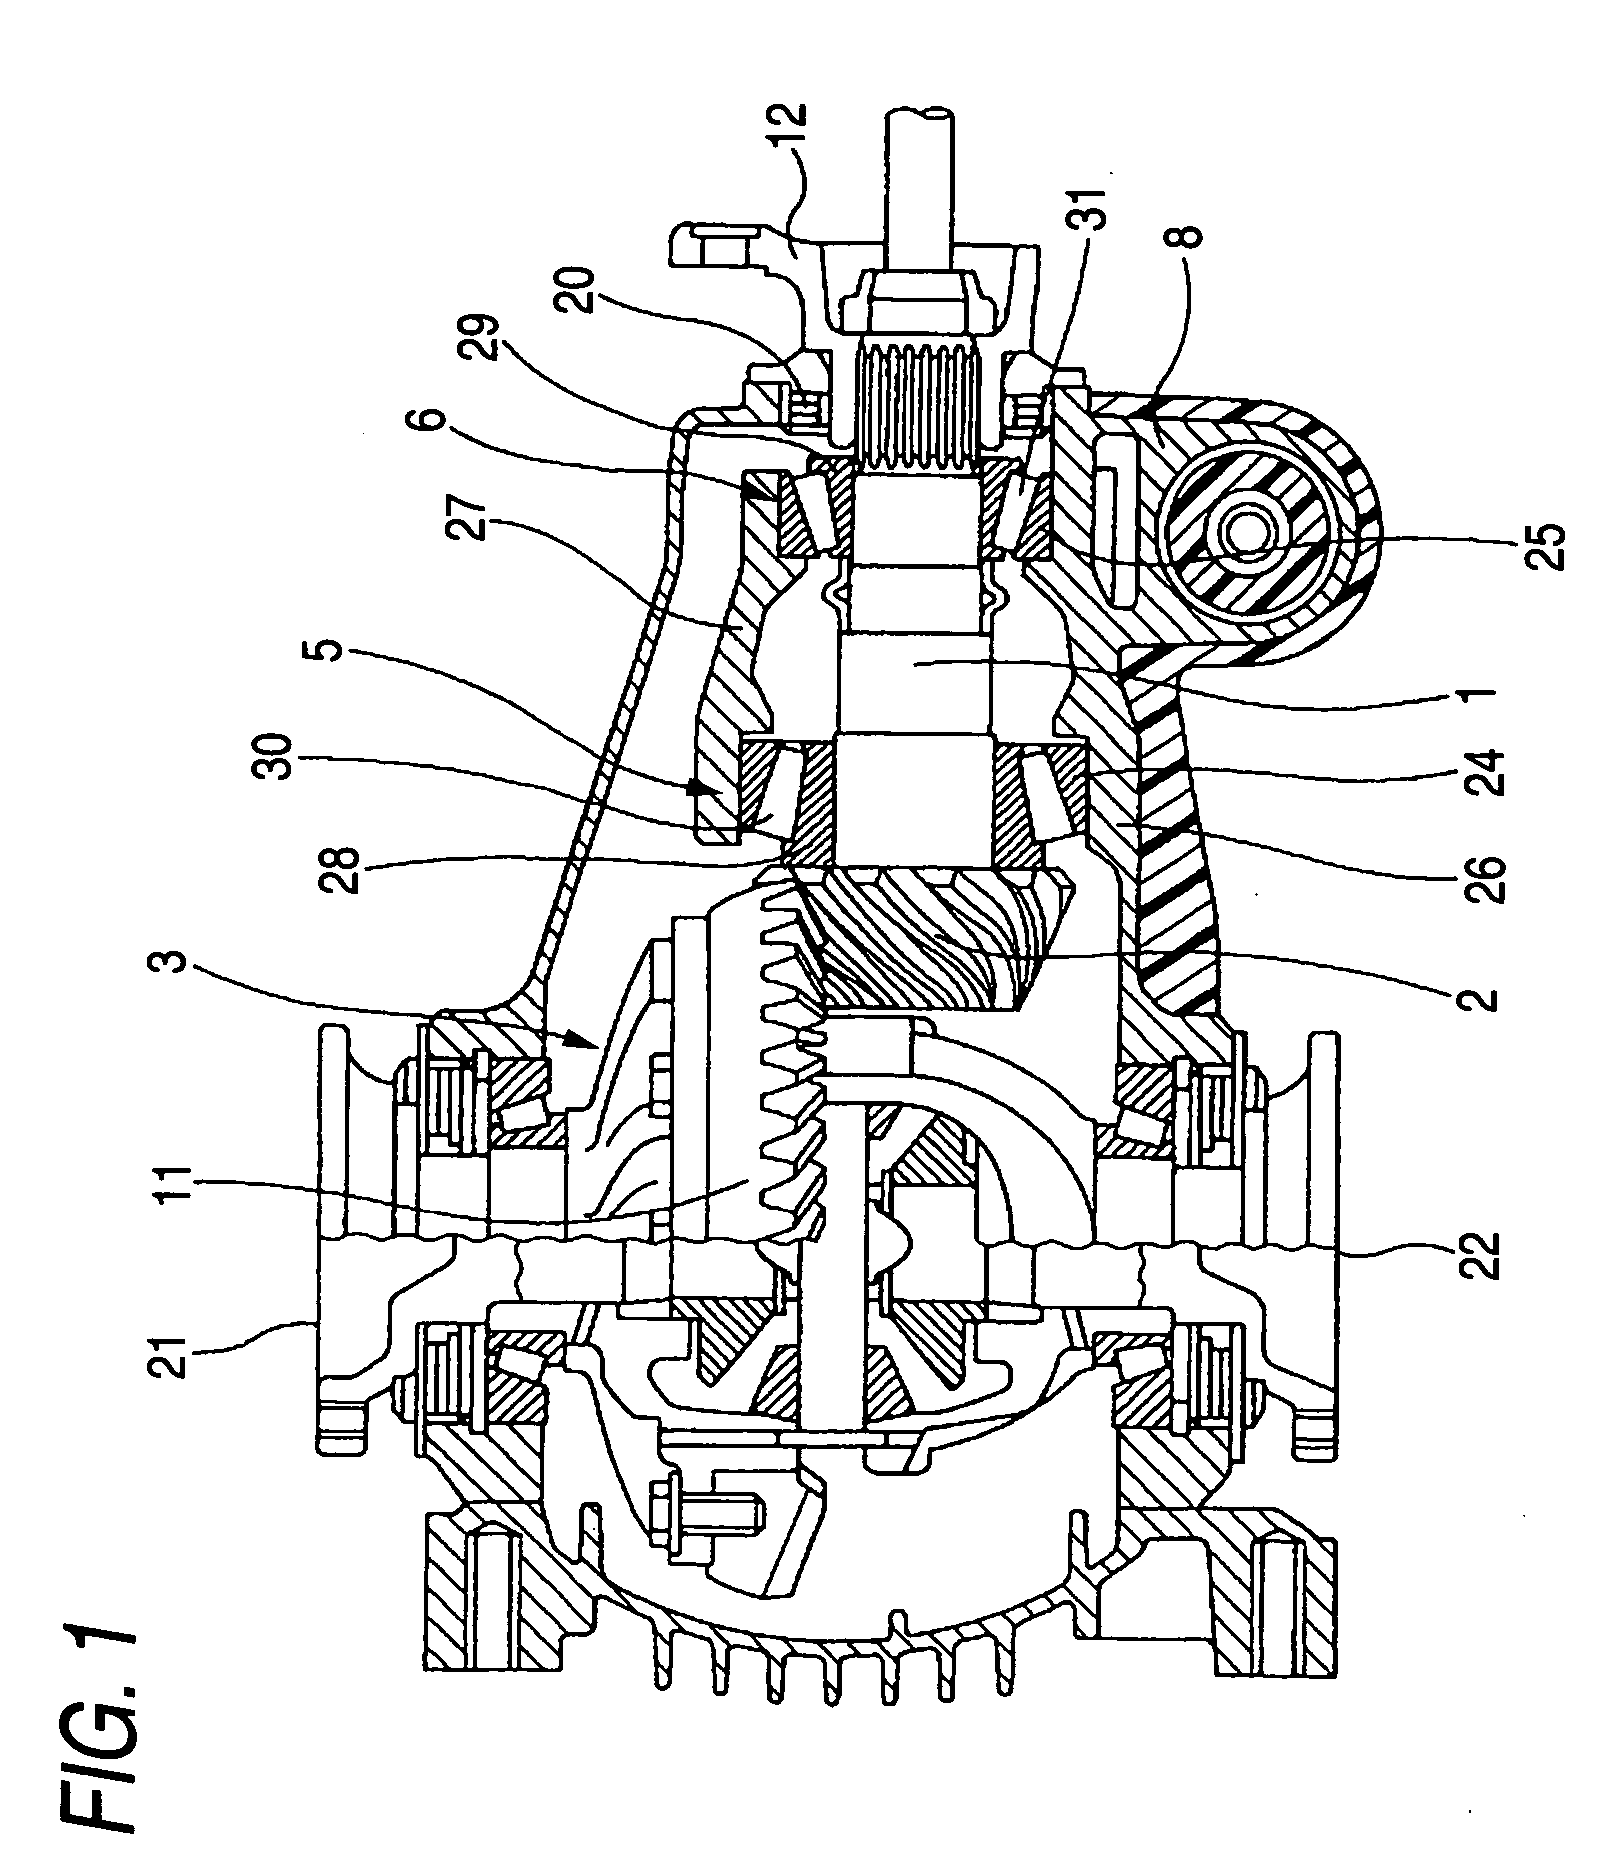 Vehicle pinion shaft support system